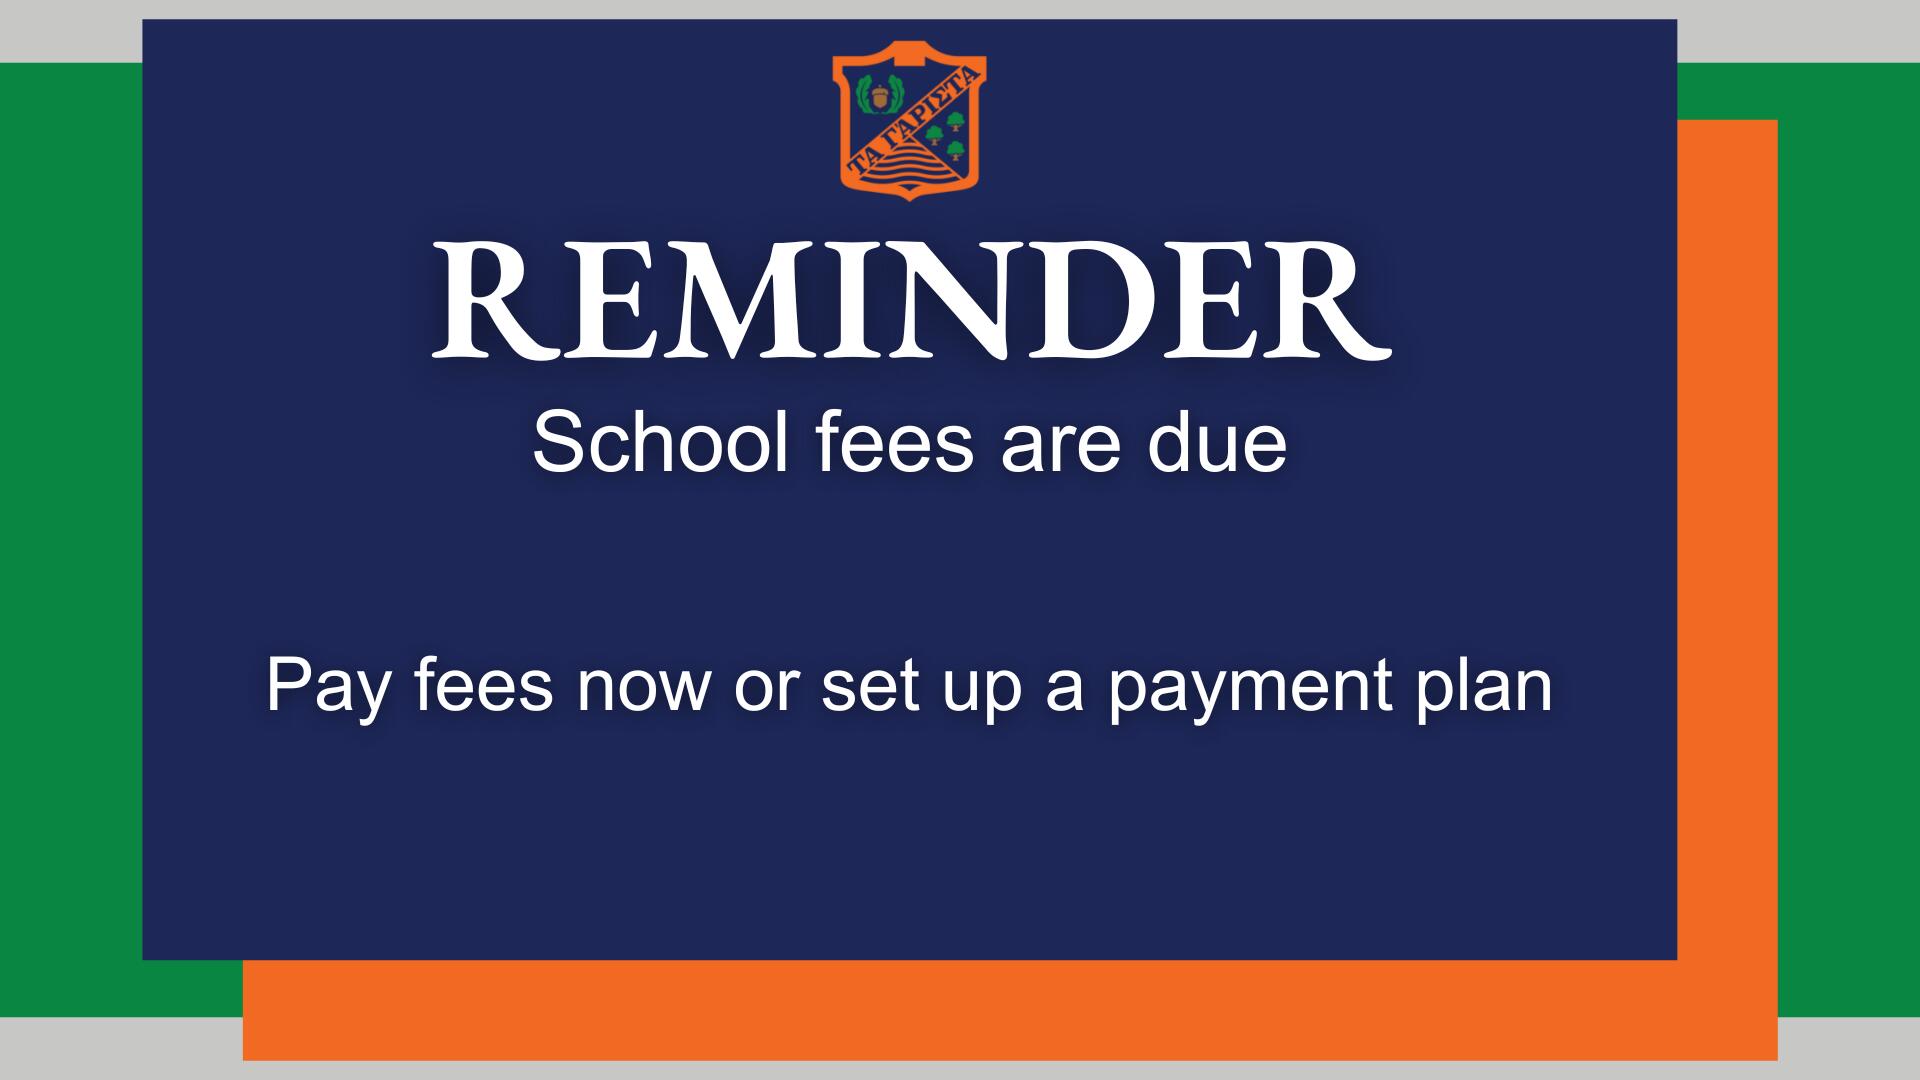 School fees are due